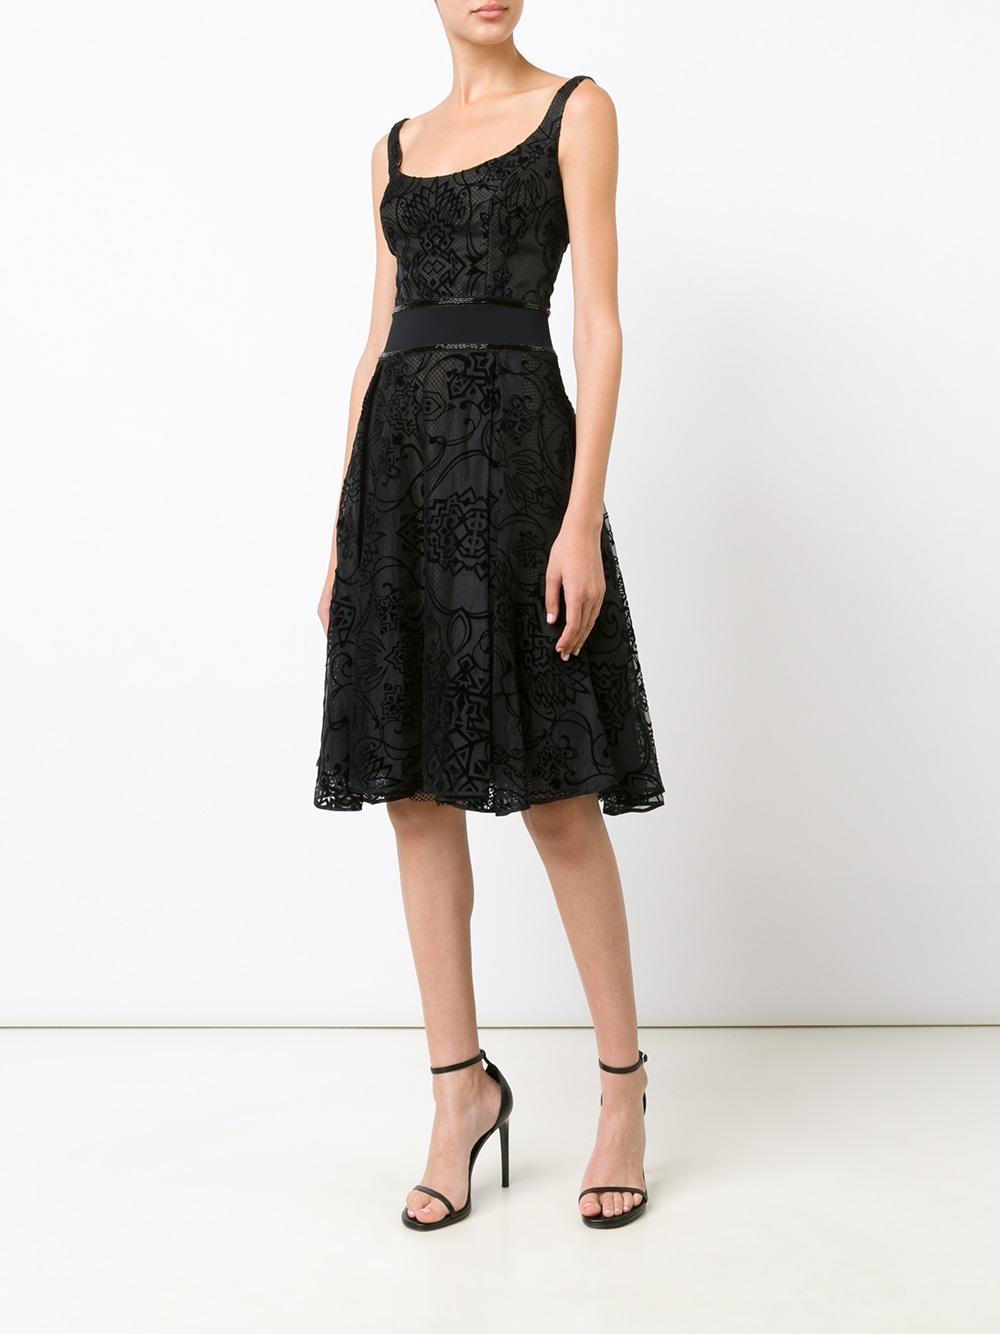 Lyst - Notte By Marchesa Flared Dress in Black